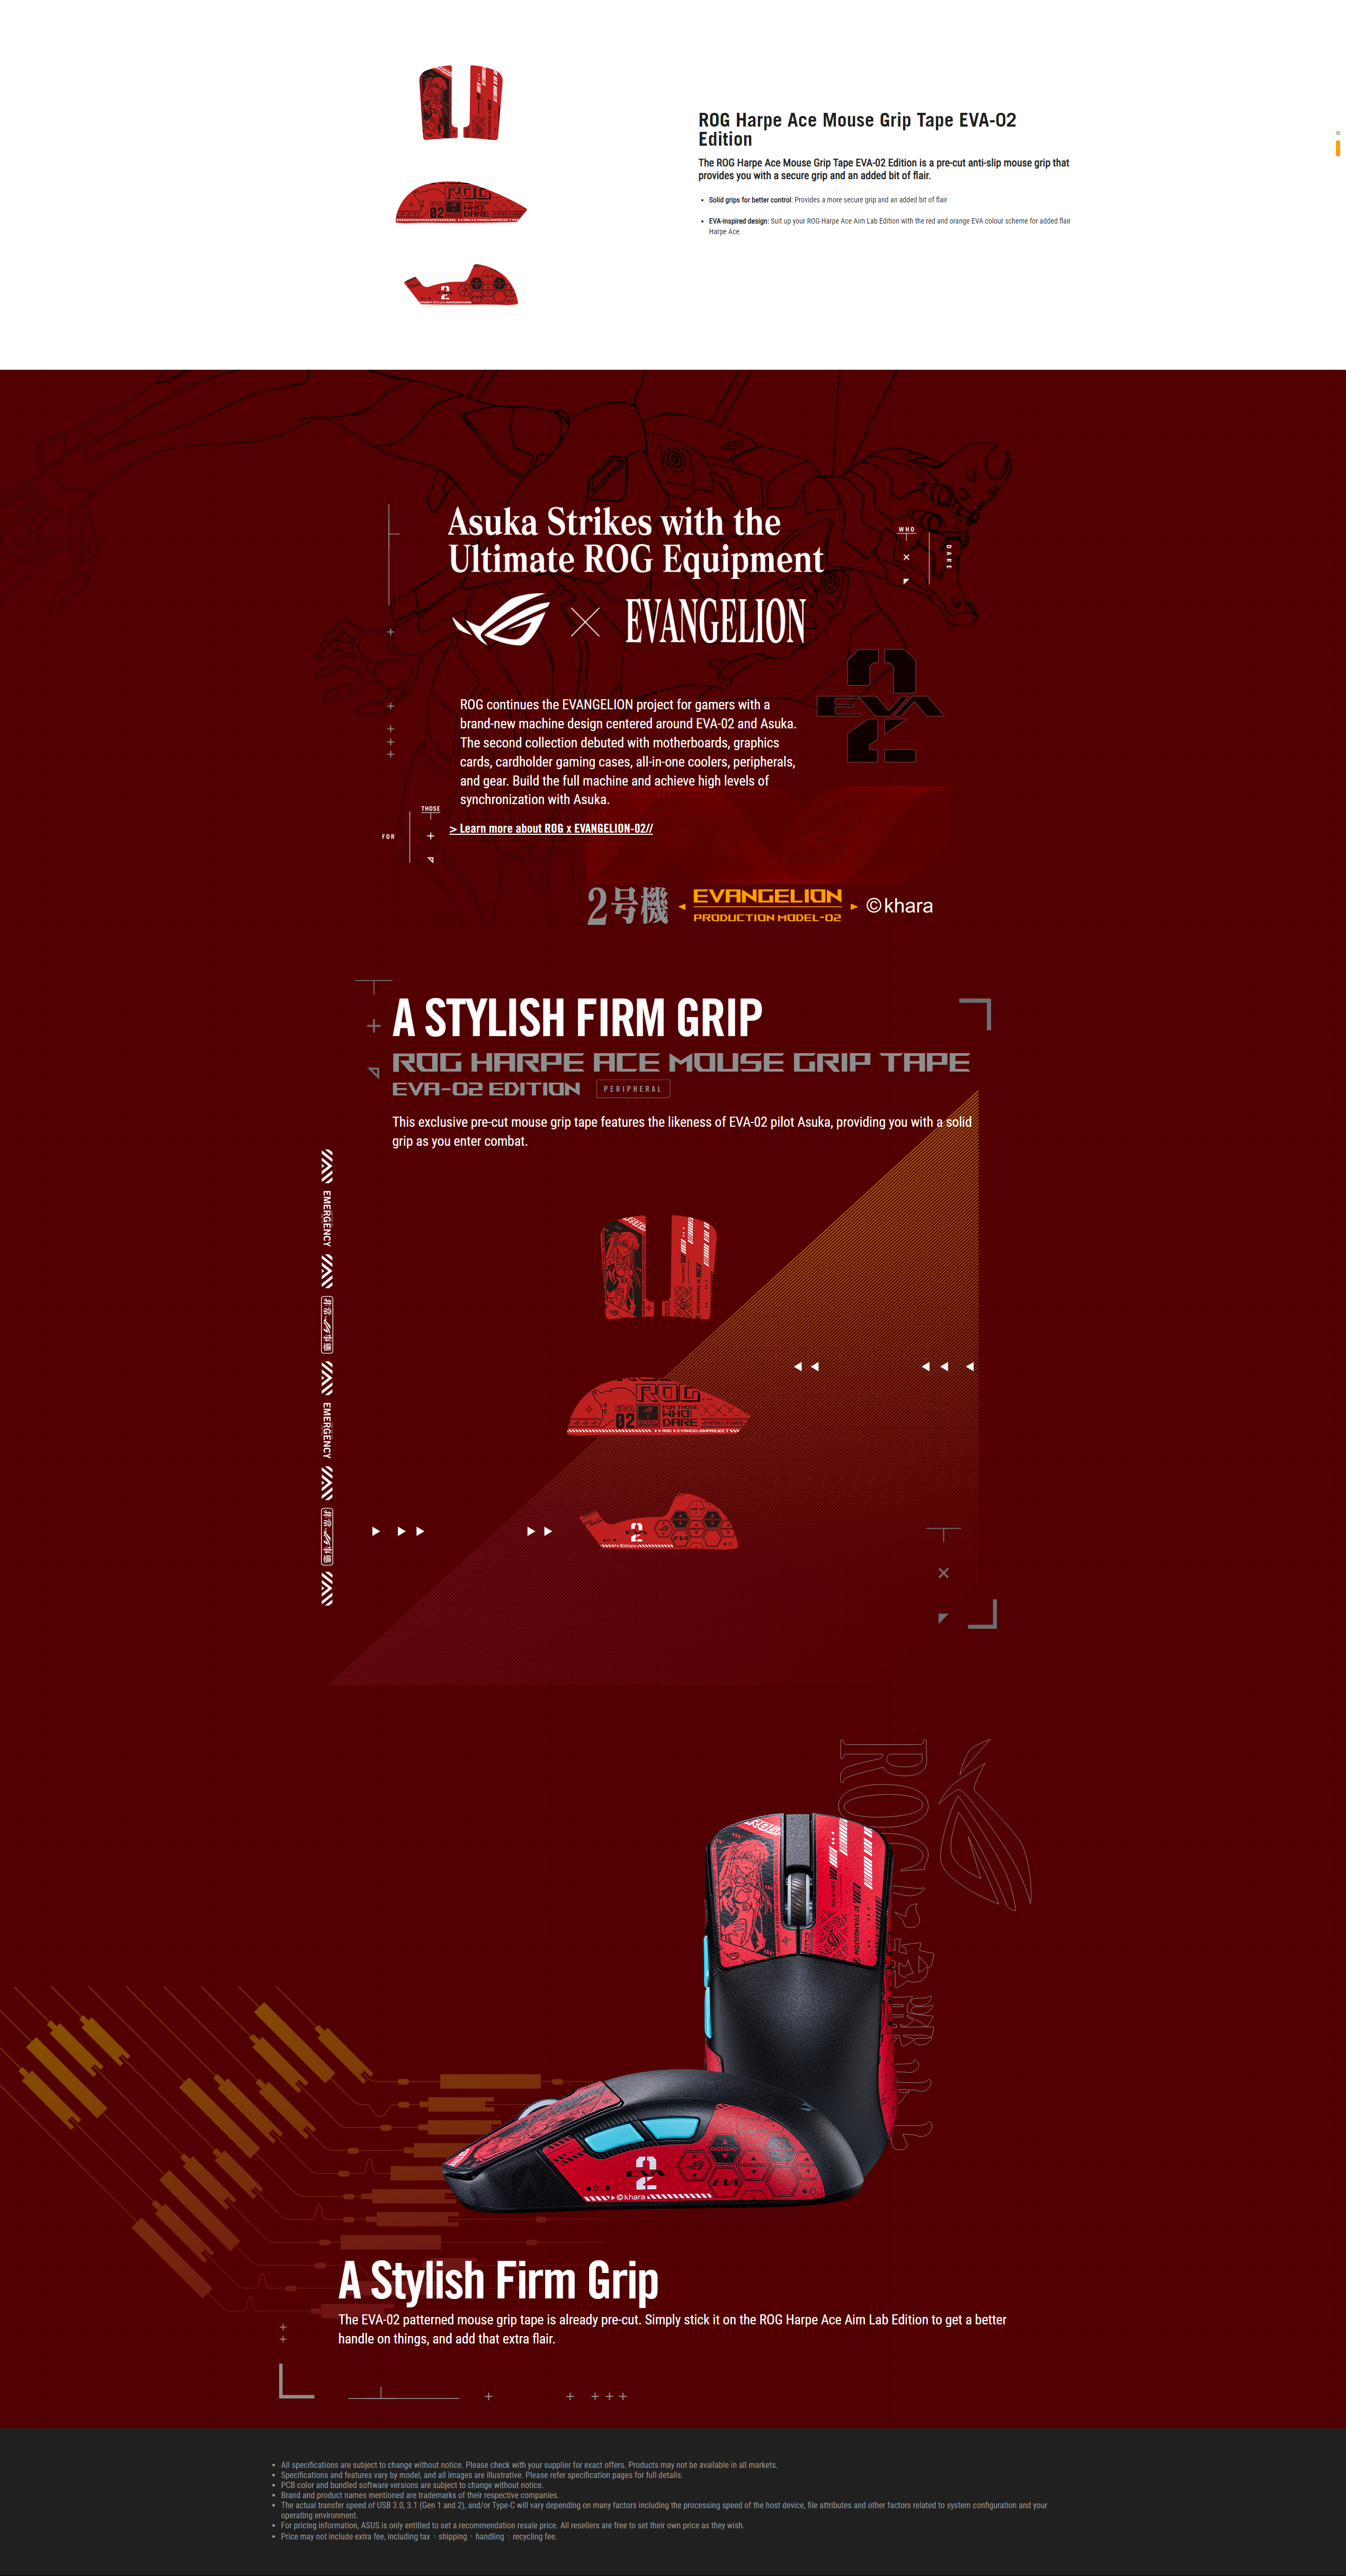 A large marketing image providing additional information about the product ASUS ROG Harpe Ace Mouse Grip Tape - EVA-02 Edition - Additional alt info not provided